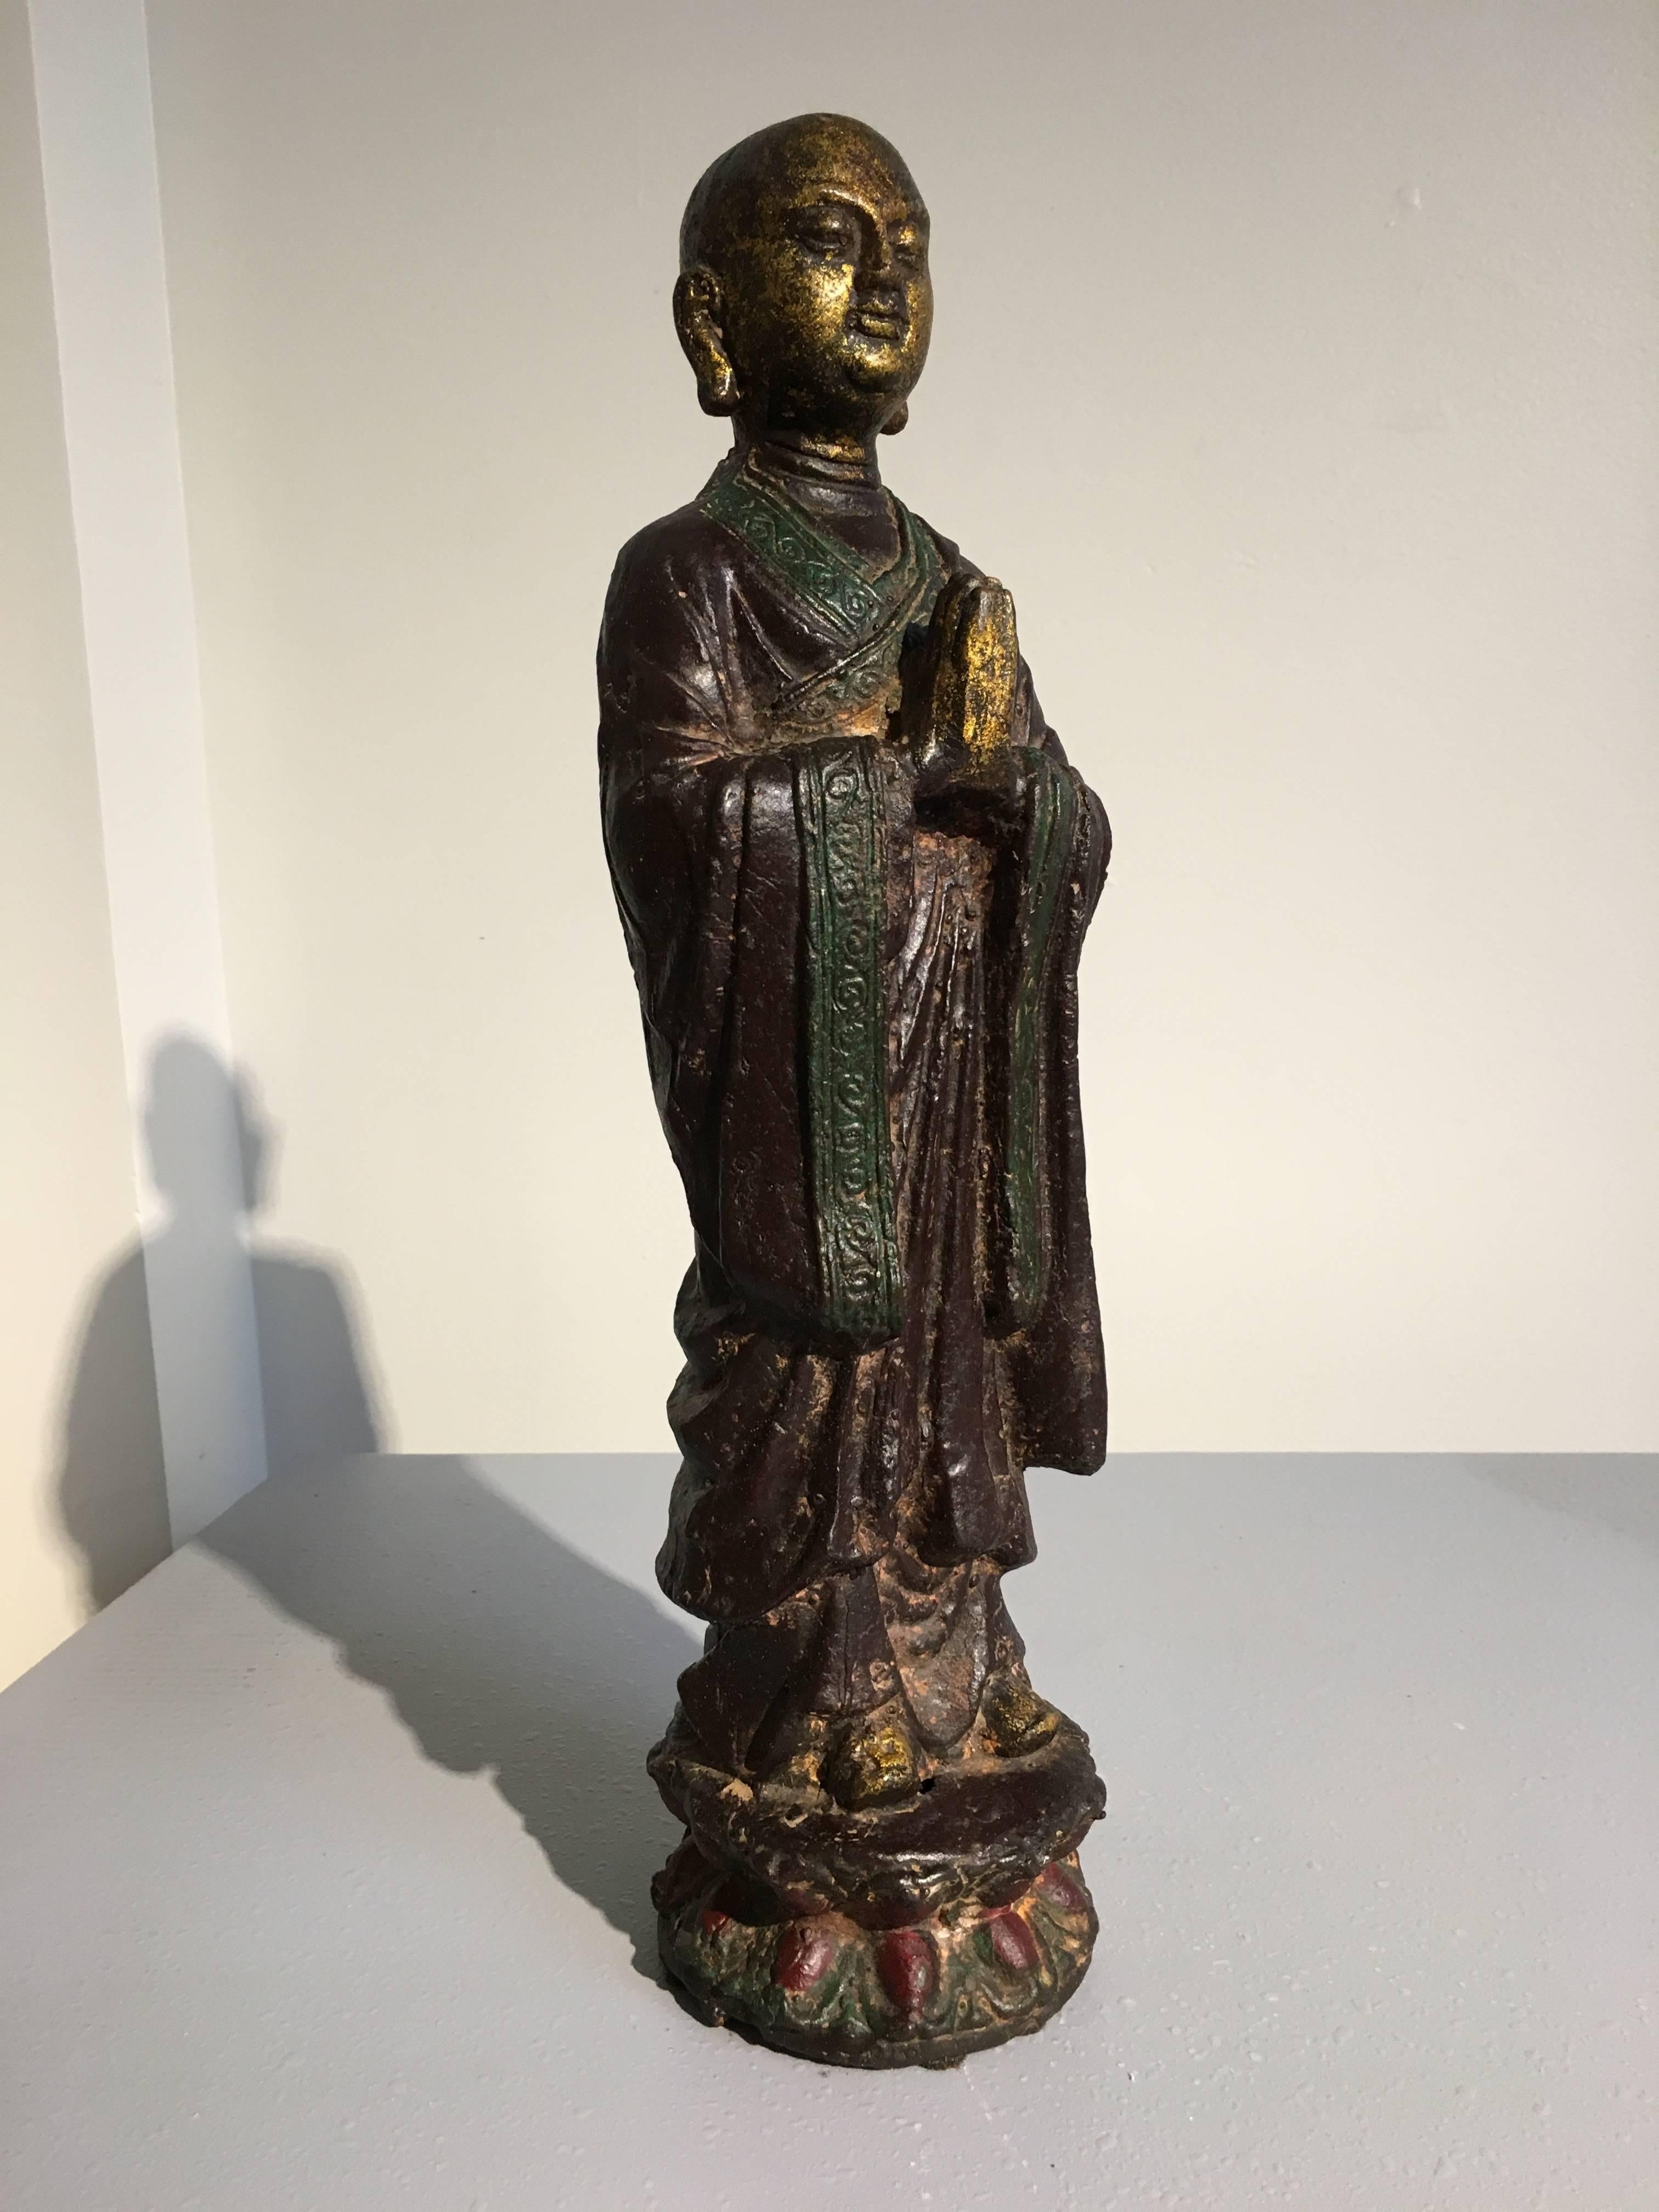 Ananda is portrayed in a typical fashion, as a youthful monk with a shaved head and dressed in simple robes. He stands upon a double lotus pedestal with hands clasped in front of him, eyes cast downwards, a serene expression upon his face. 
The